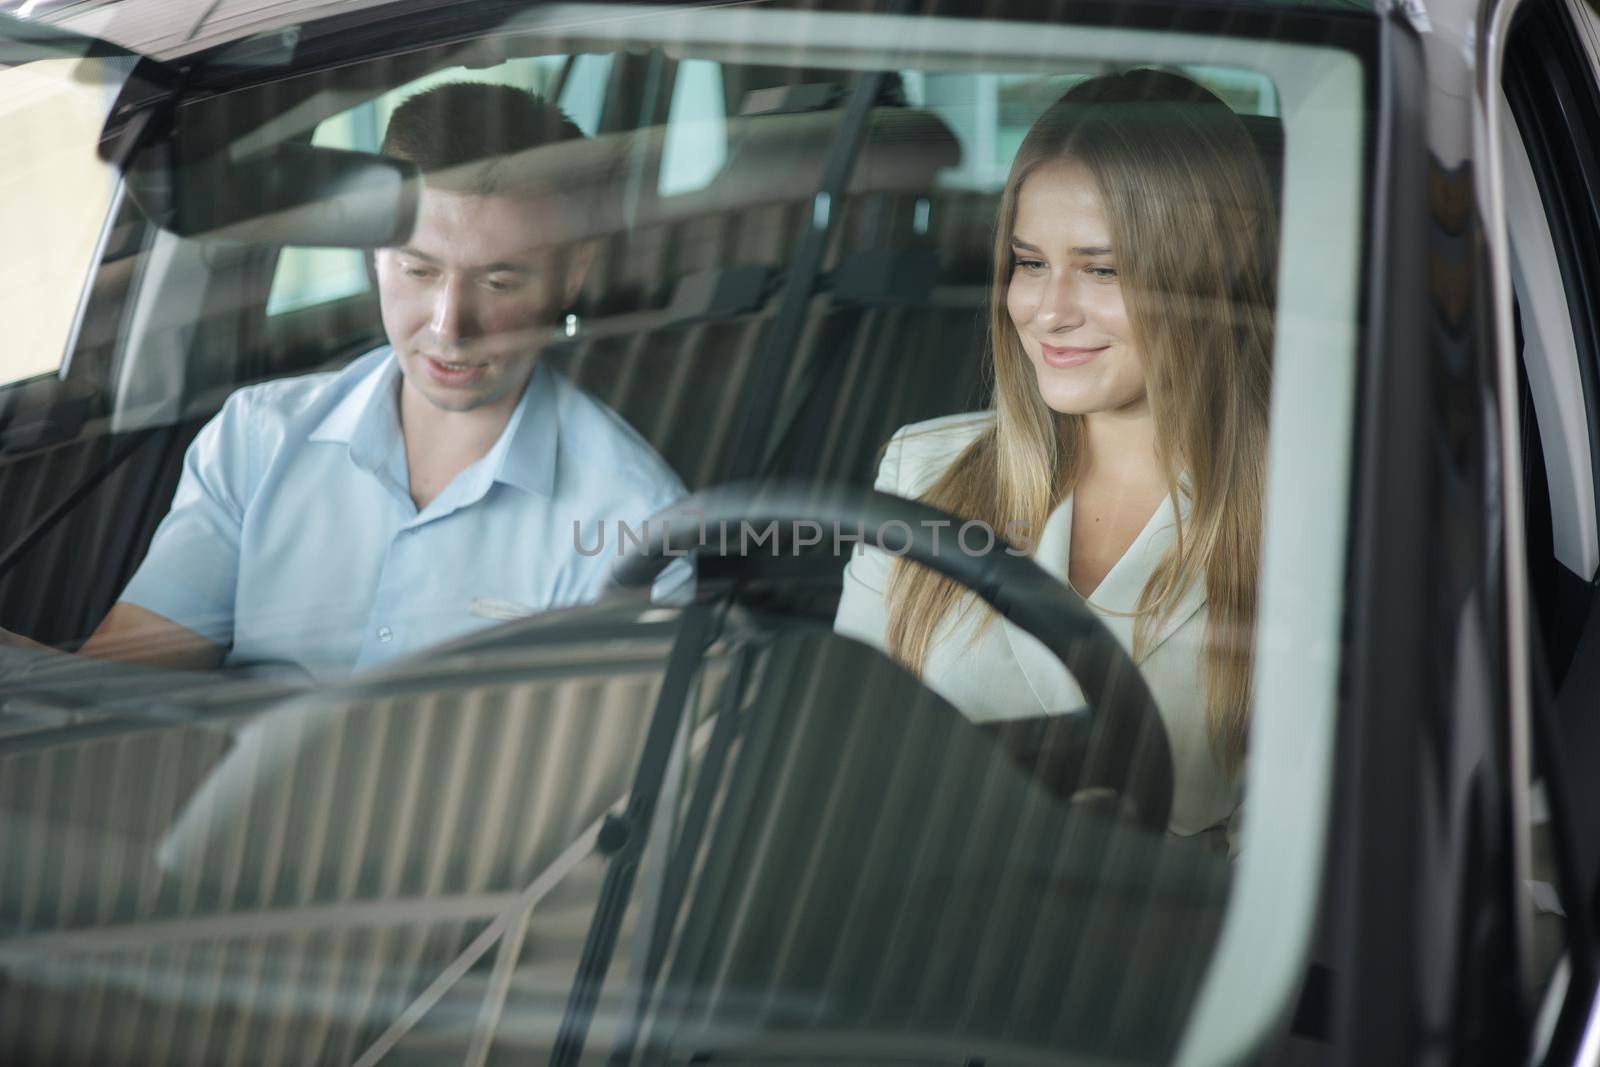 Bussines woman choosing car i car showroom. Salesperson sitting in car with customer and show desing by Gritsiv